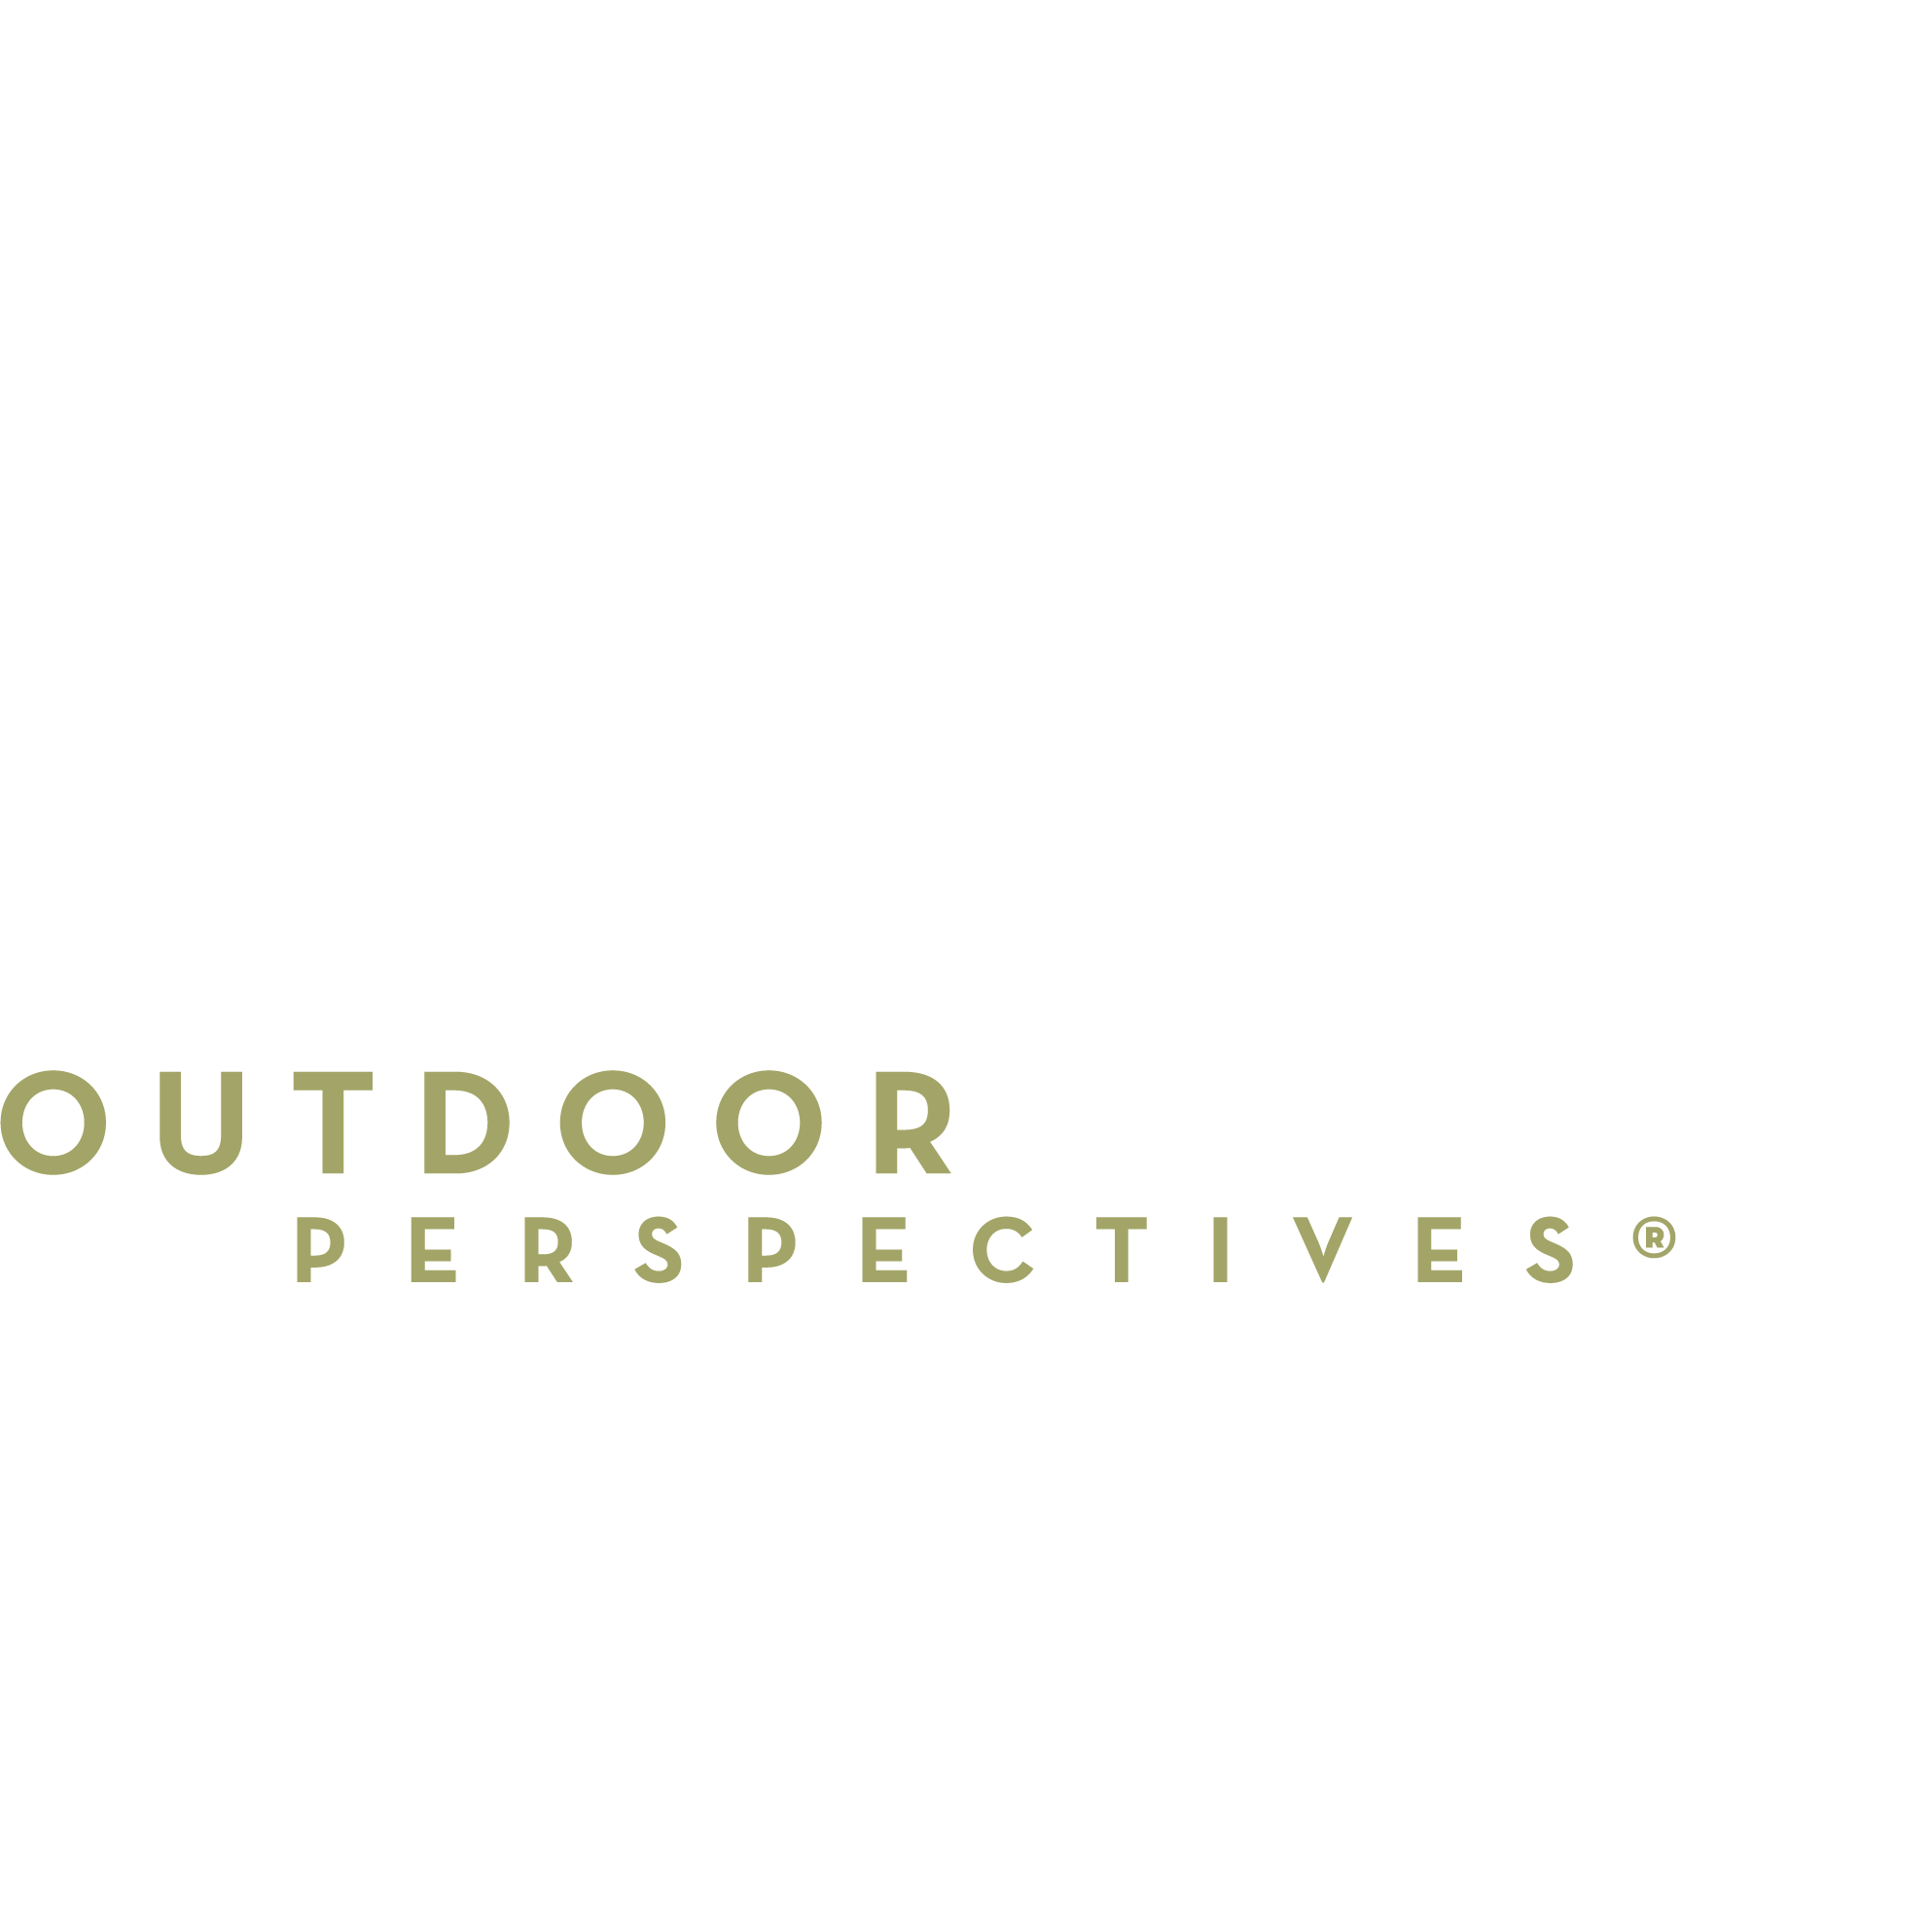 Business Logo for Outdoor Lighting Perspectives of Miami Outdoor Lighting Perspectives of Miami Miami (305)901-7650